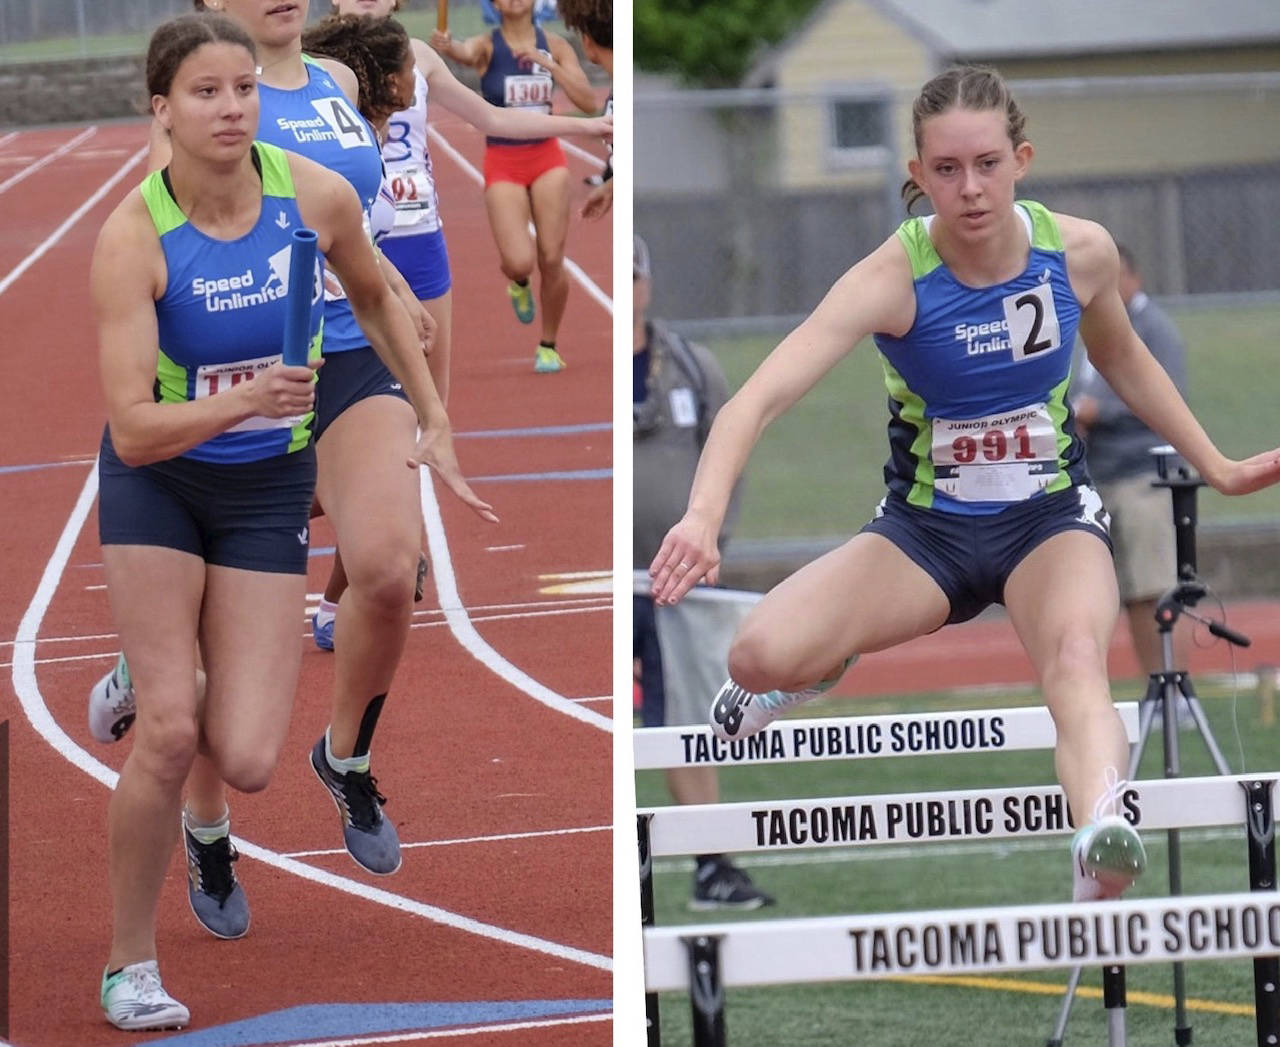 Maya Virdell, left, and Susie Lepow, right, will compete at the USATF Nationals Junior Olympic Track and Field Championships, which take place from July 22-28 in Sacramento, California. Photo courtesy of the Mercer Island Cross Country Booster Club